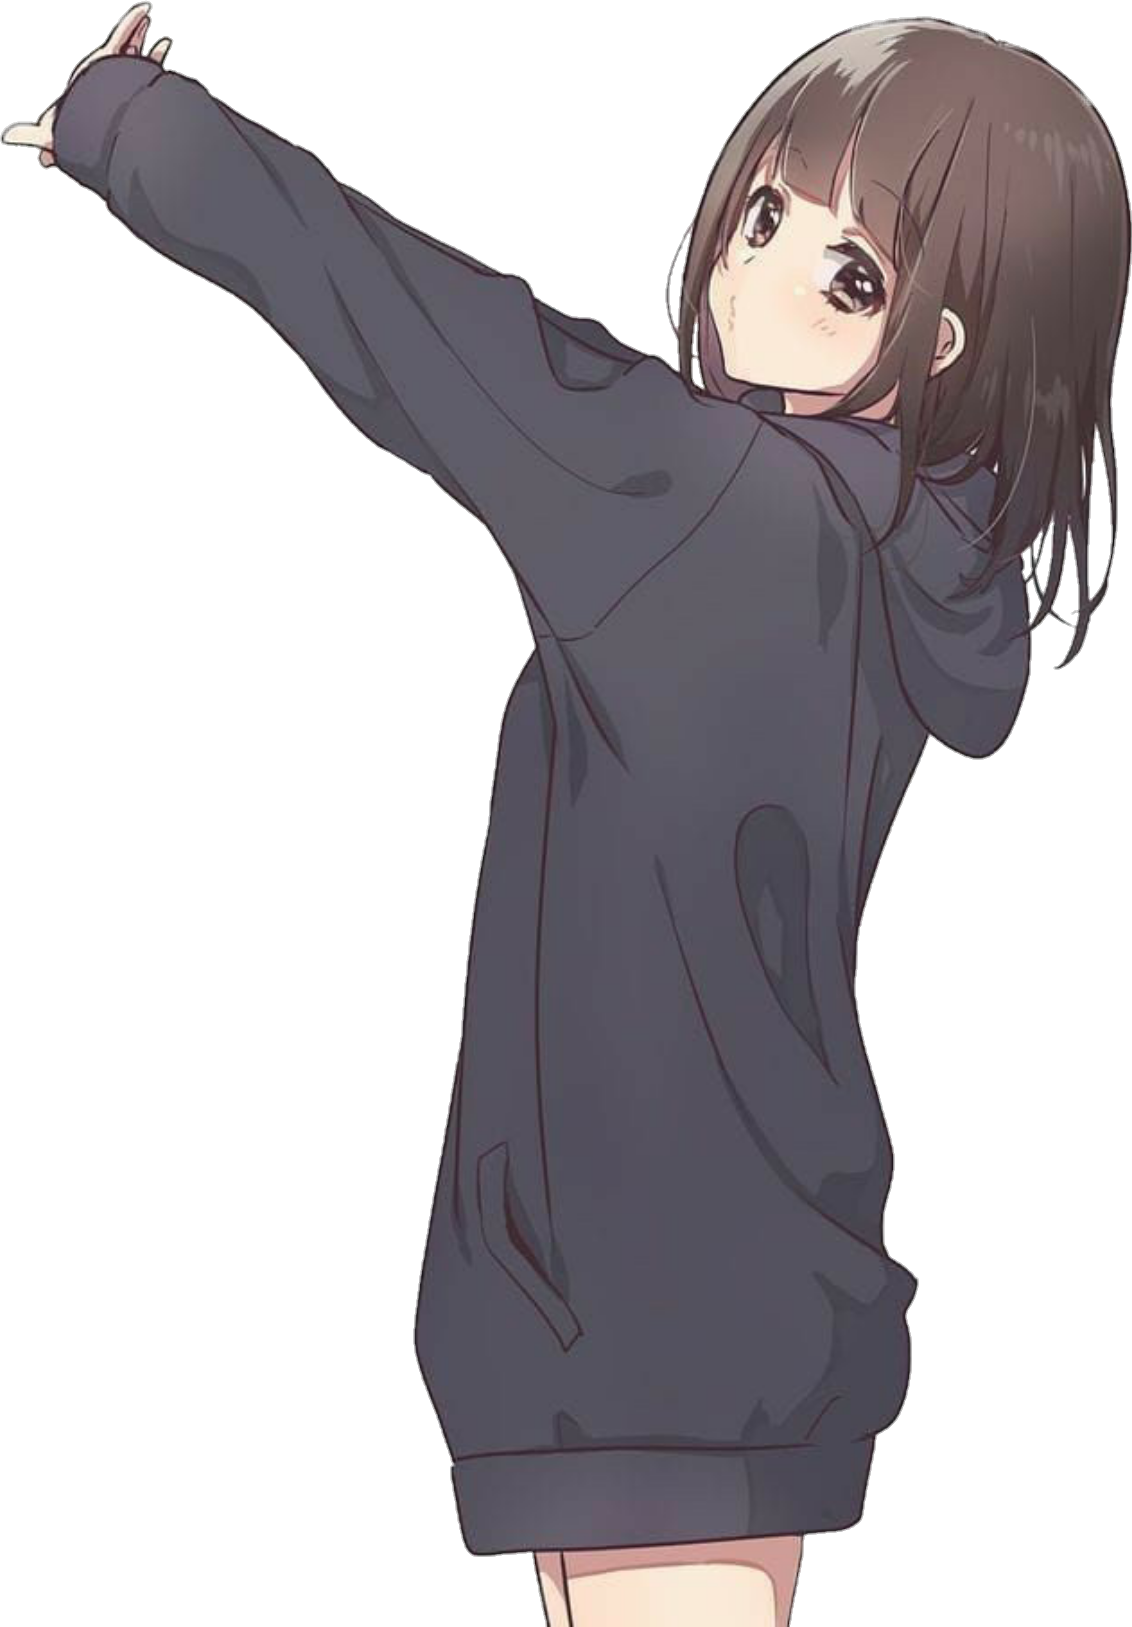 Buy > cute anime girl with hoodie > in stock